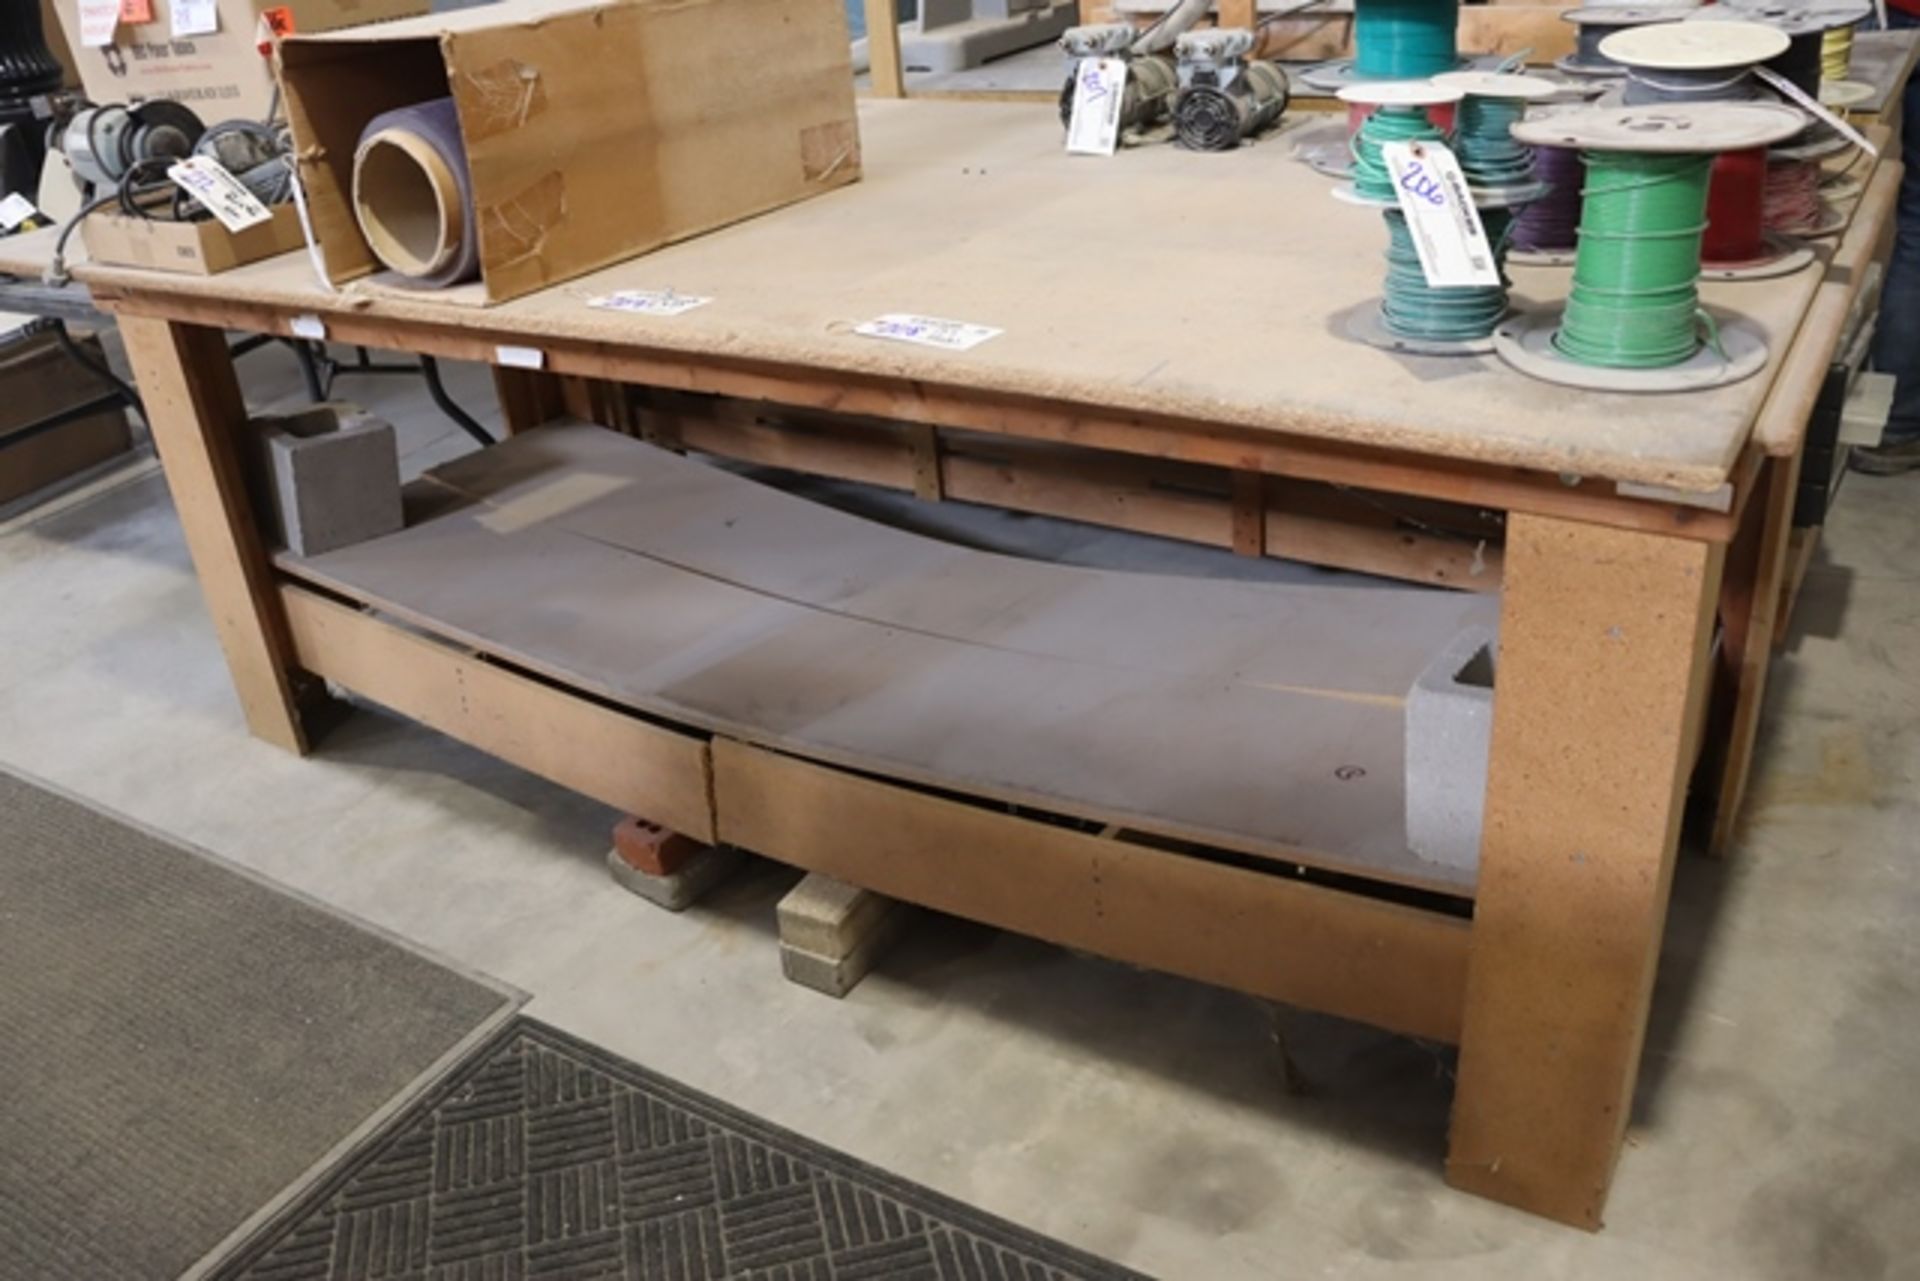 4' x 8' wood framed work table - bottom shelf is busted